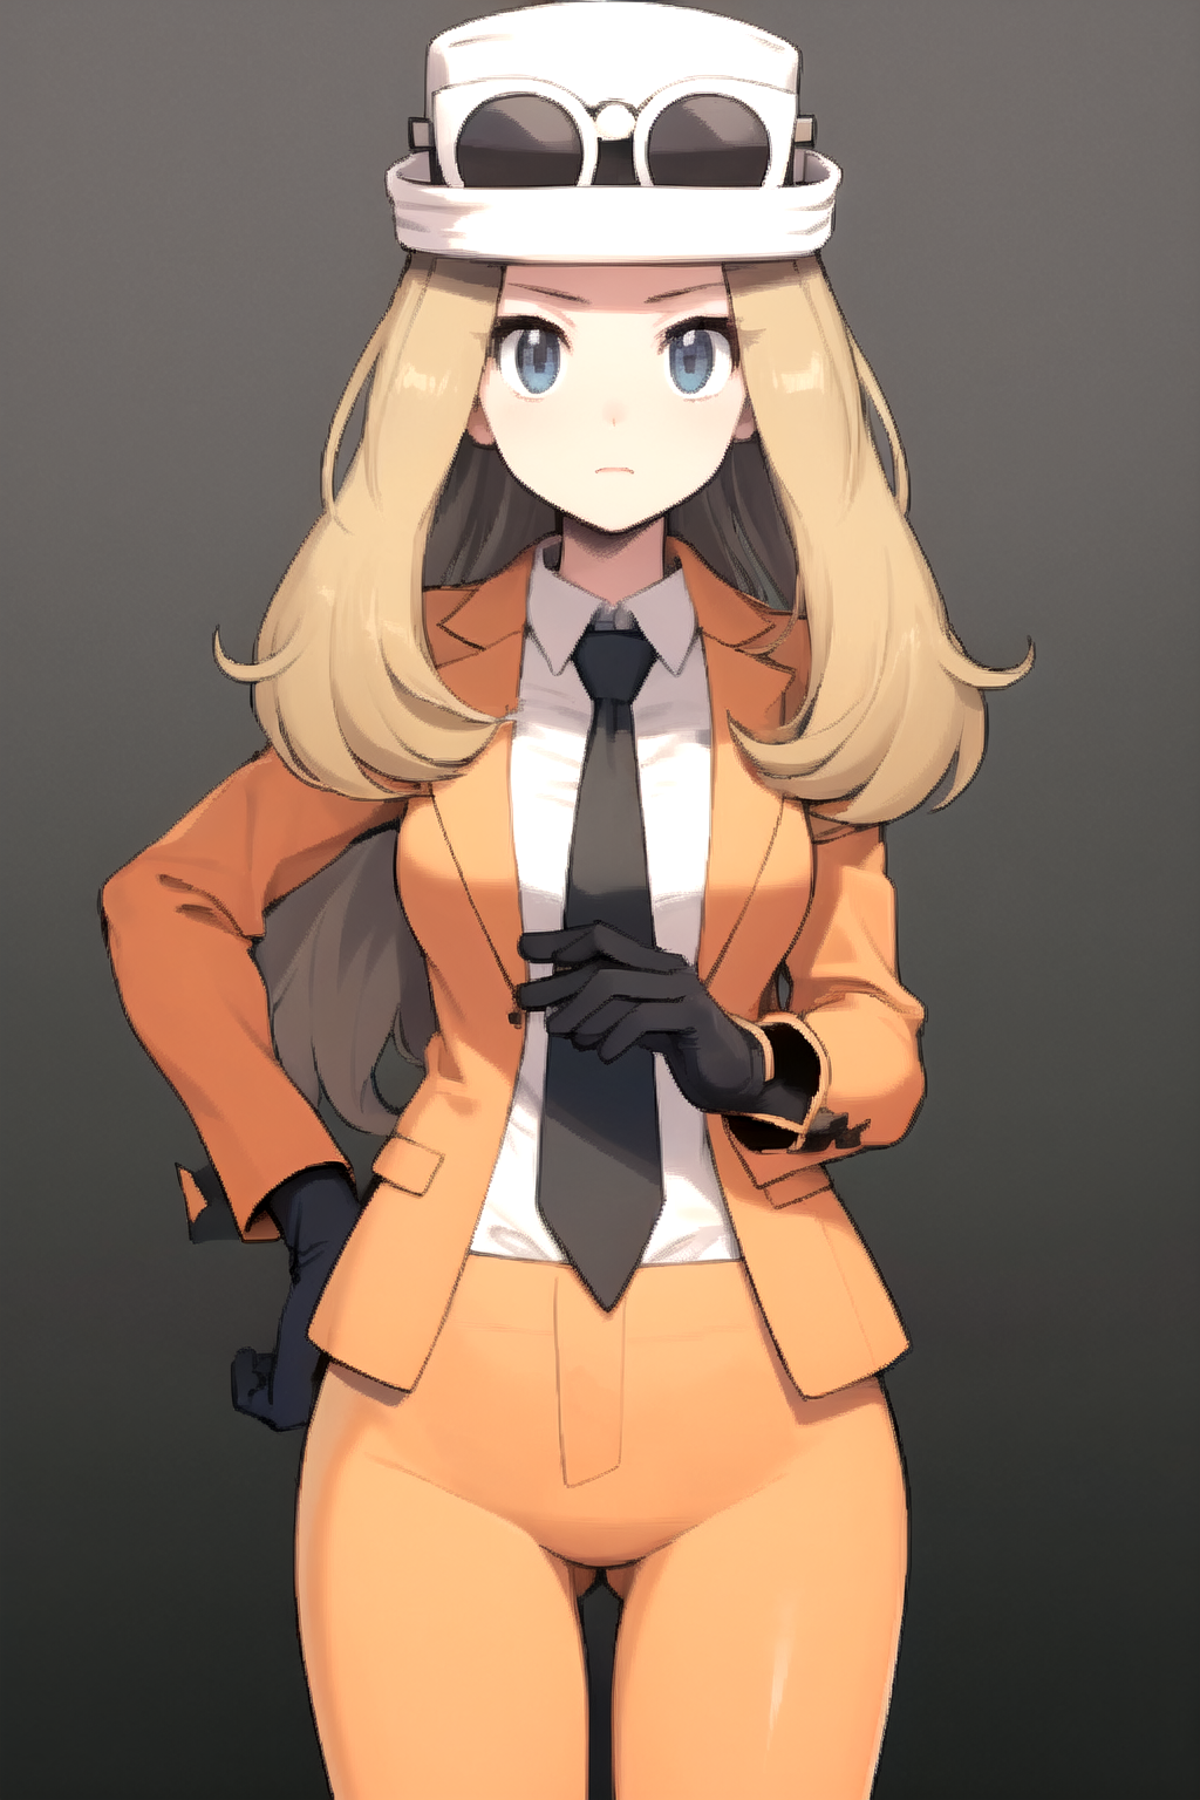 Pokemon - Serena - Game 5 Outfits image by Idkanymore50